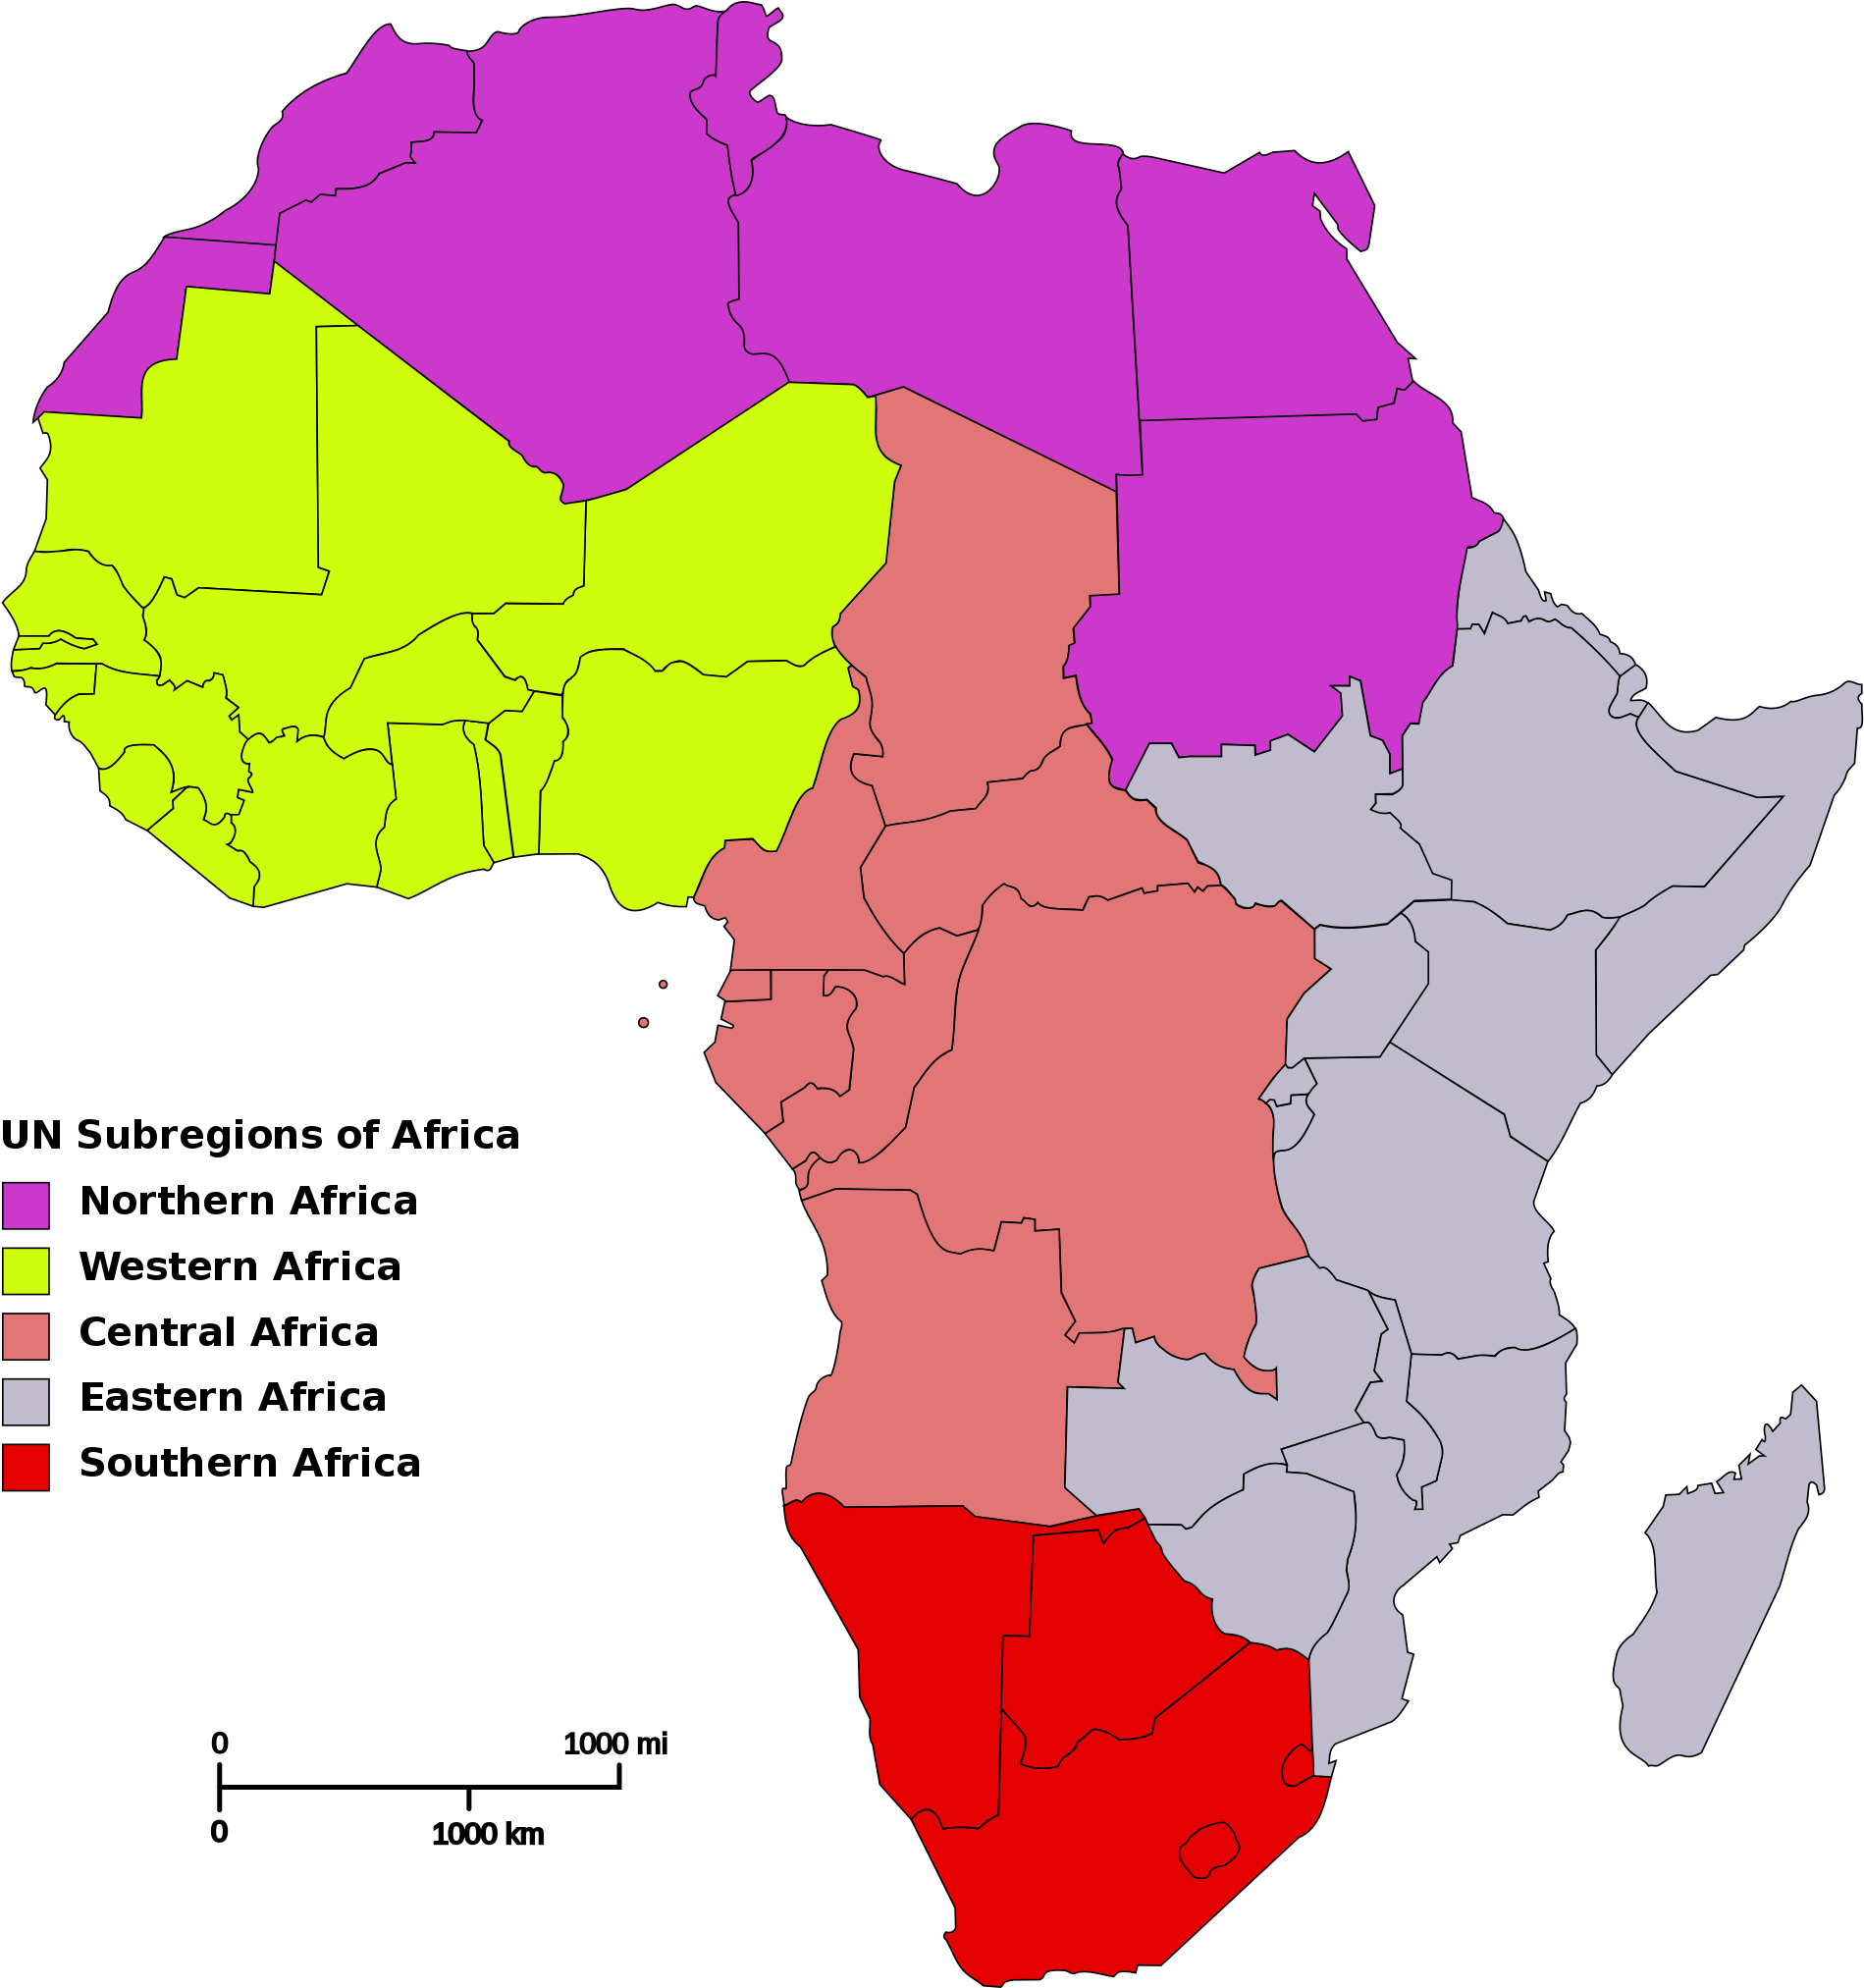 A Map Of Africa With Different Colored States